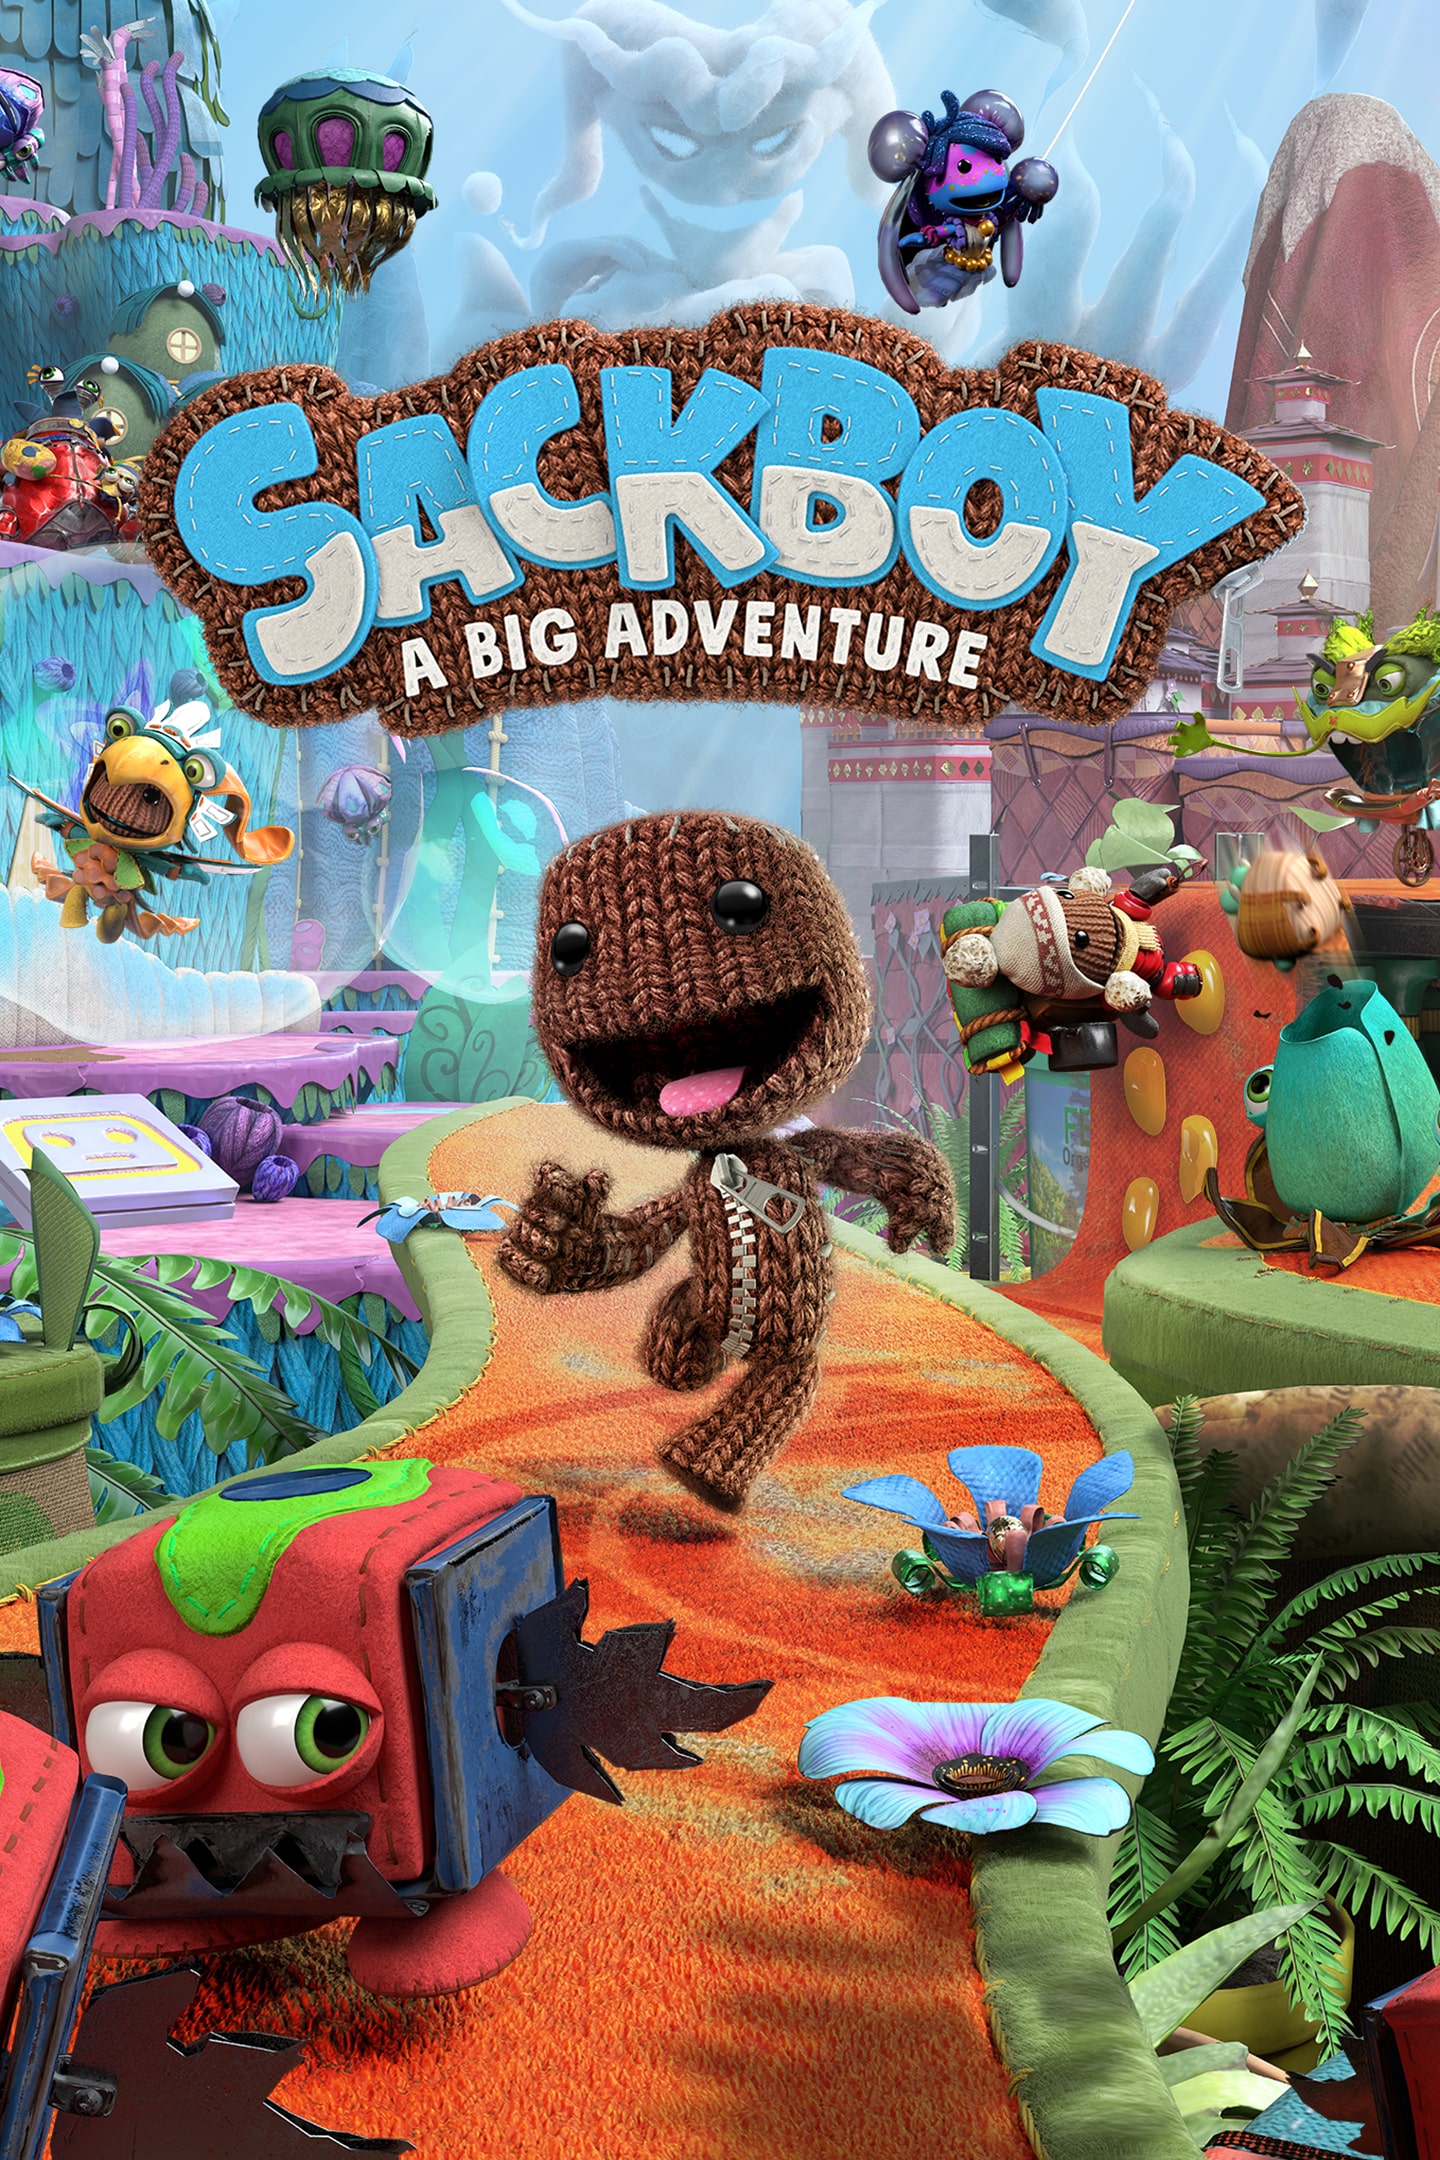 Sackboy A Big Adventure - PS5 and PS4 Games | PlayStation (UK)